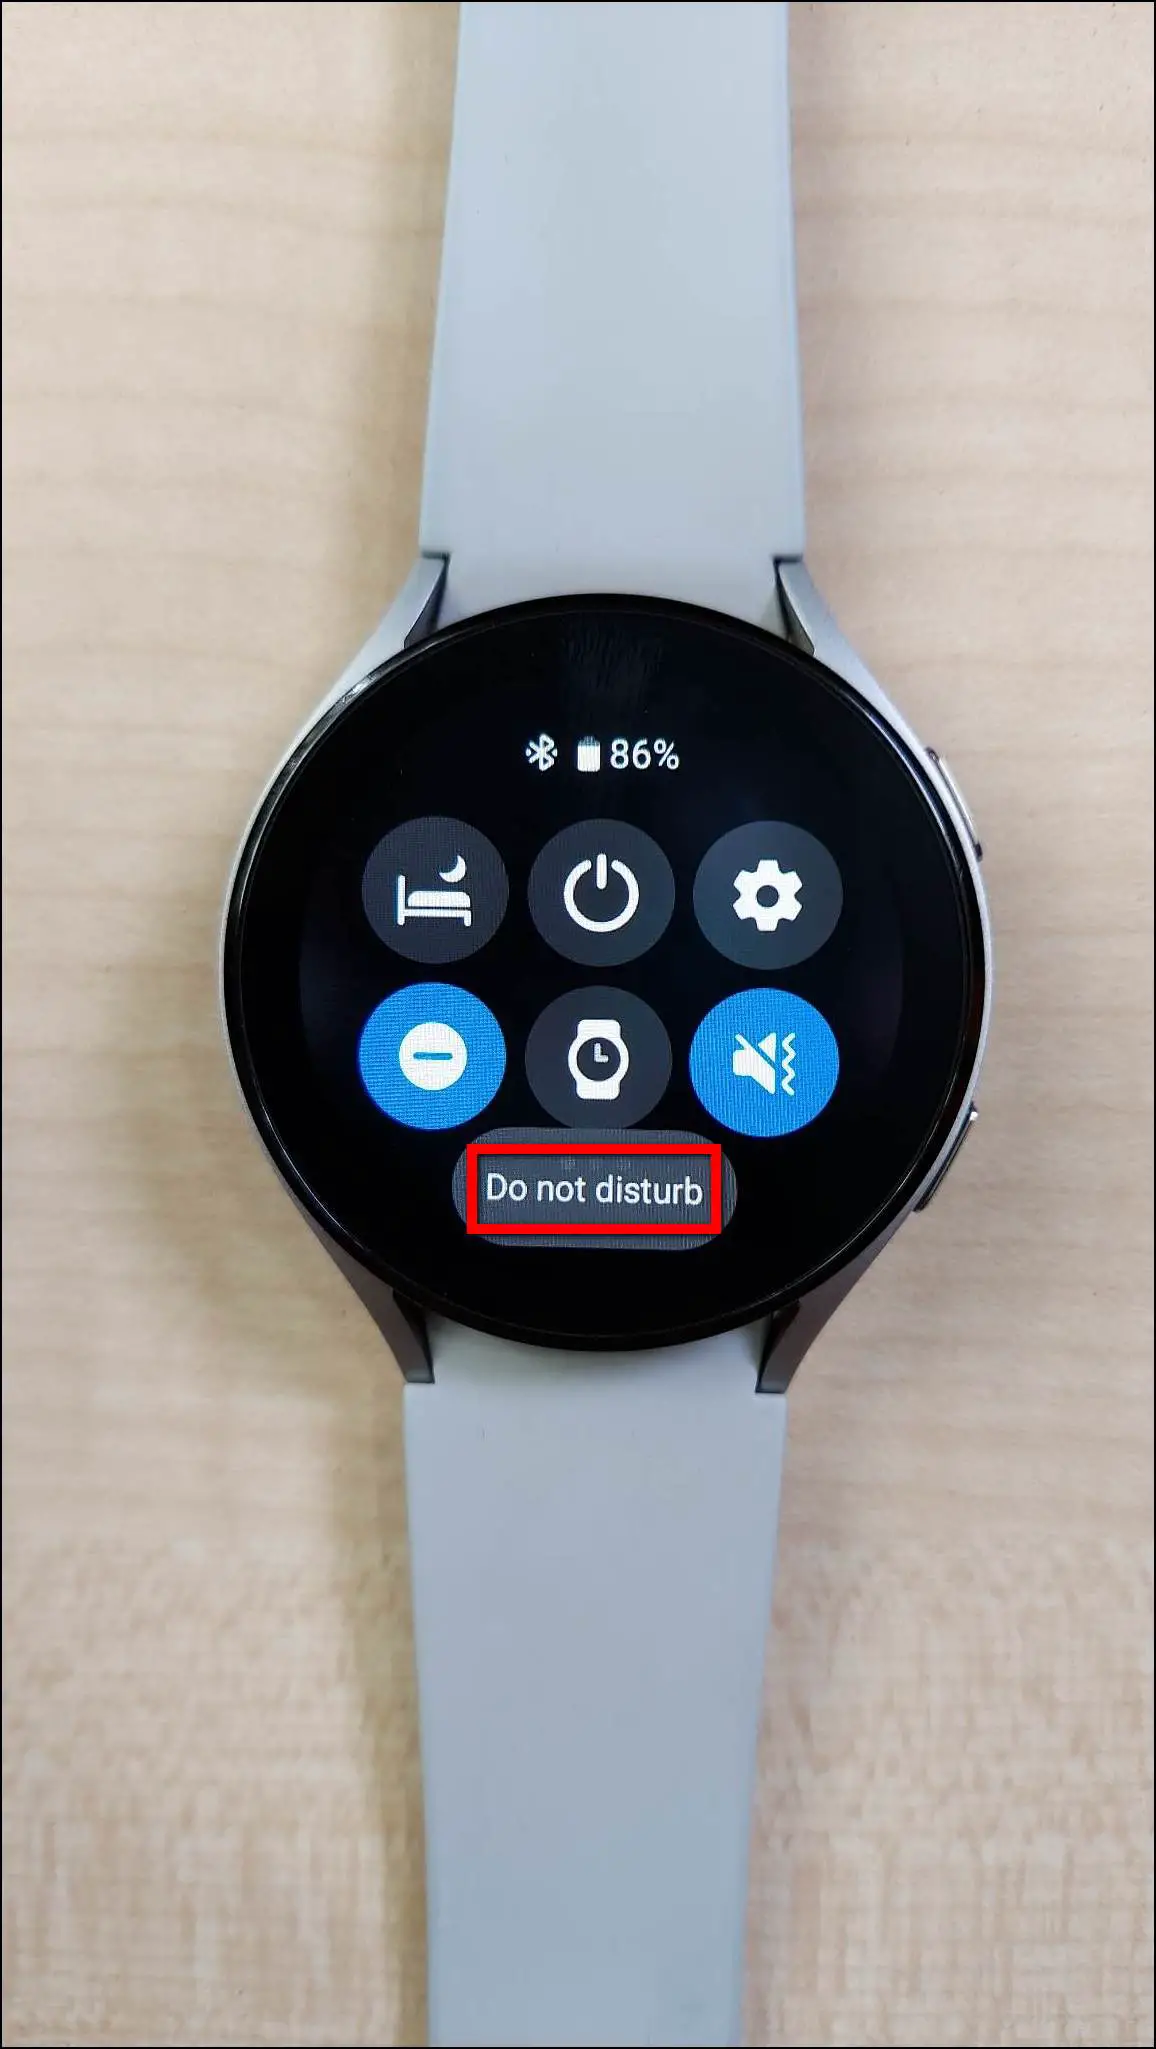 Enable DND on Galaxy Watch 4